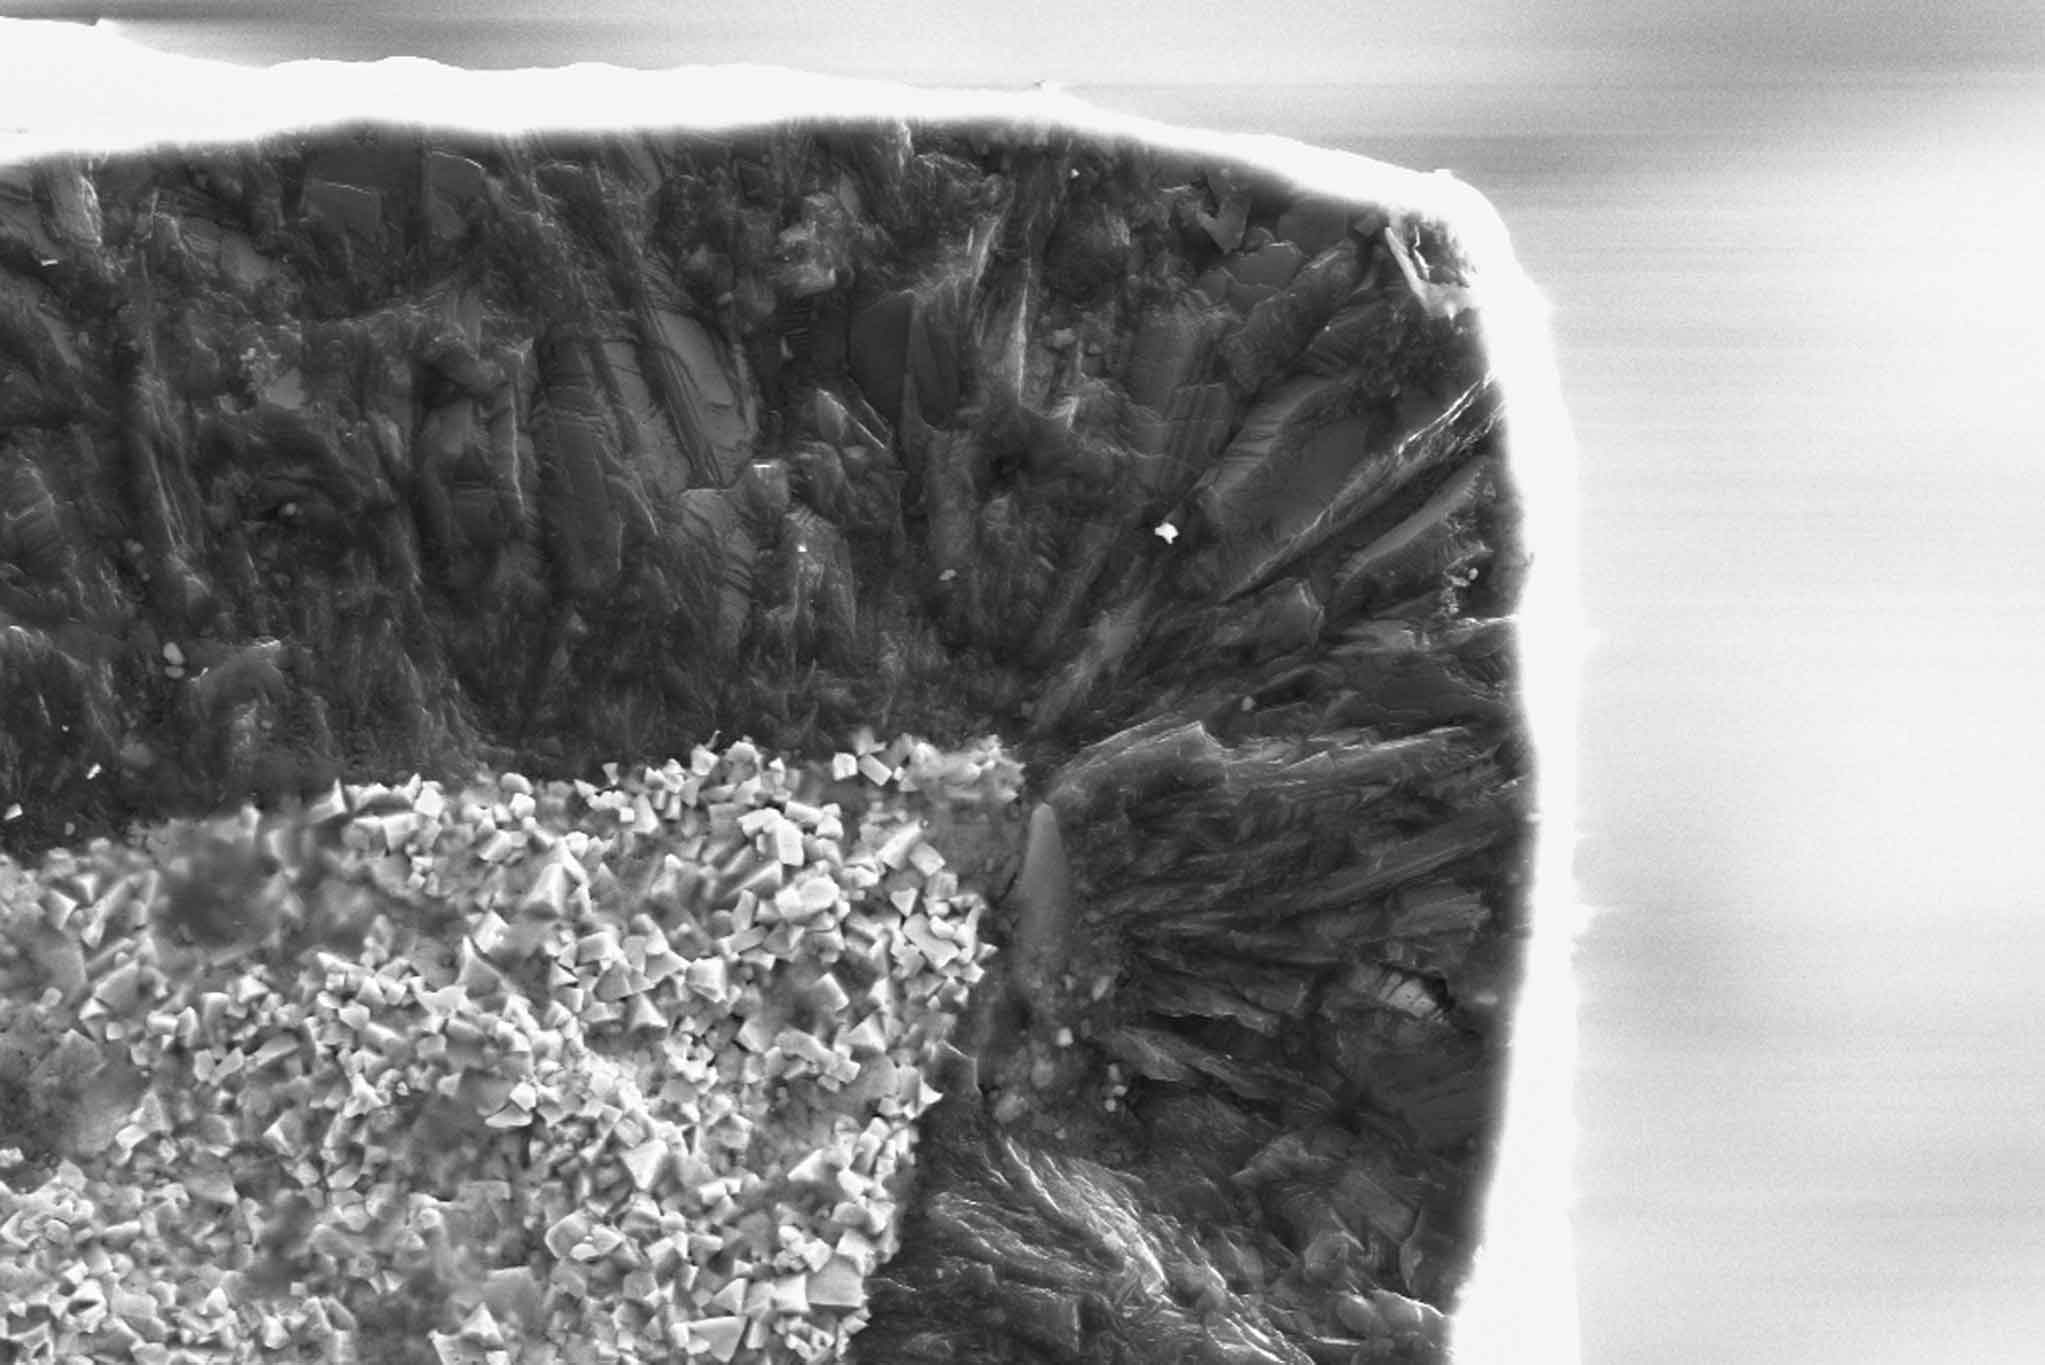 SEM image of the break edge of a diamond-coated solid carbide tool. Enlarged: 3,000x.